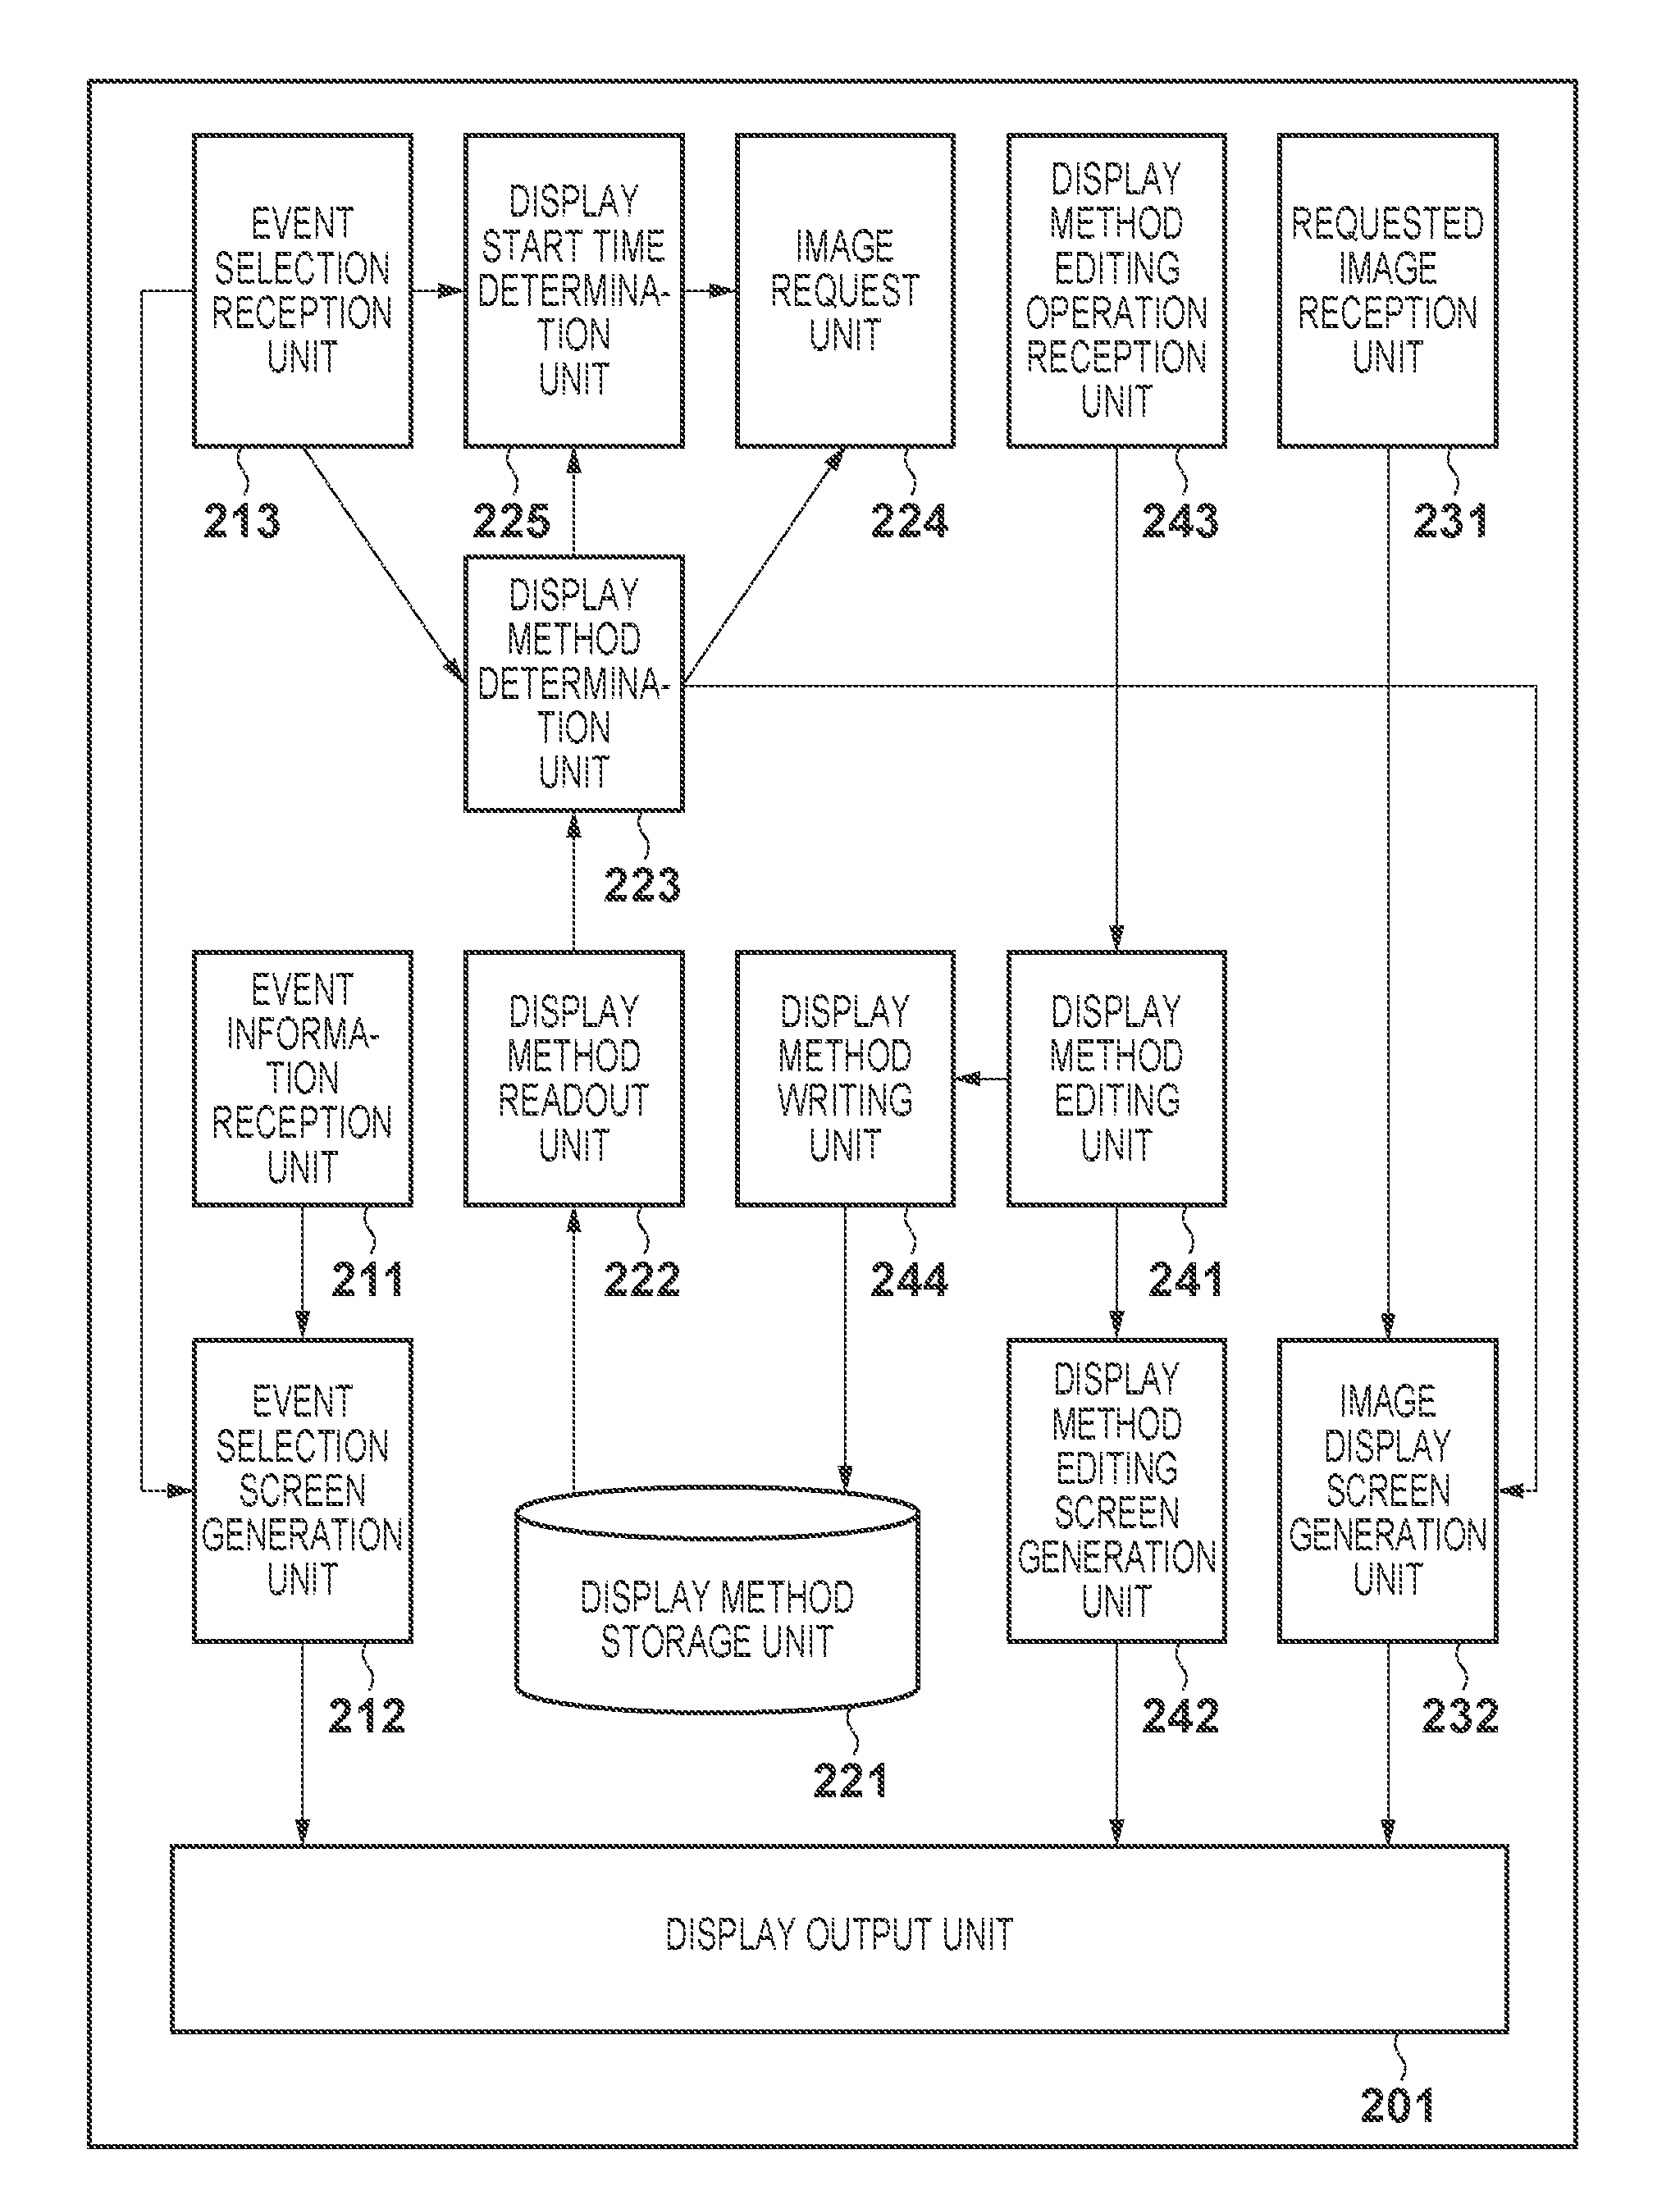 Display control apparatus, reproduction system, and recording medium in which display control is performed based on a detected event